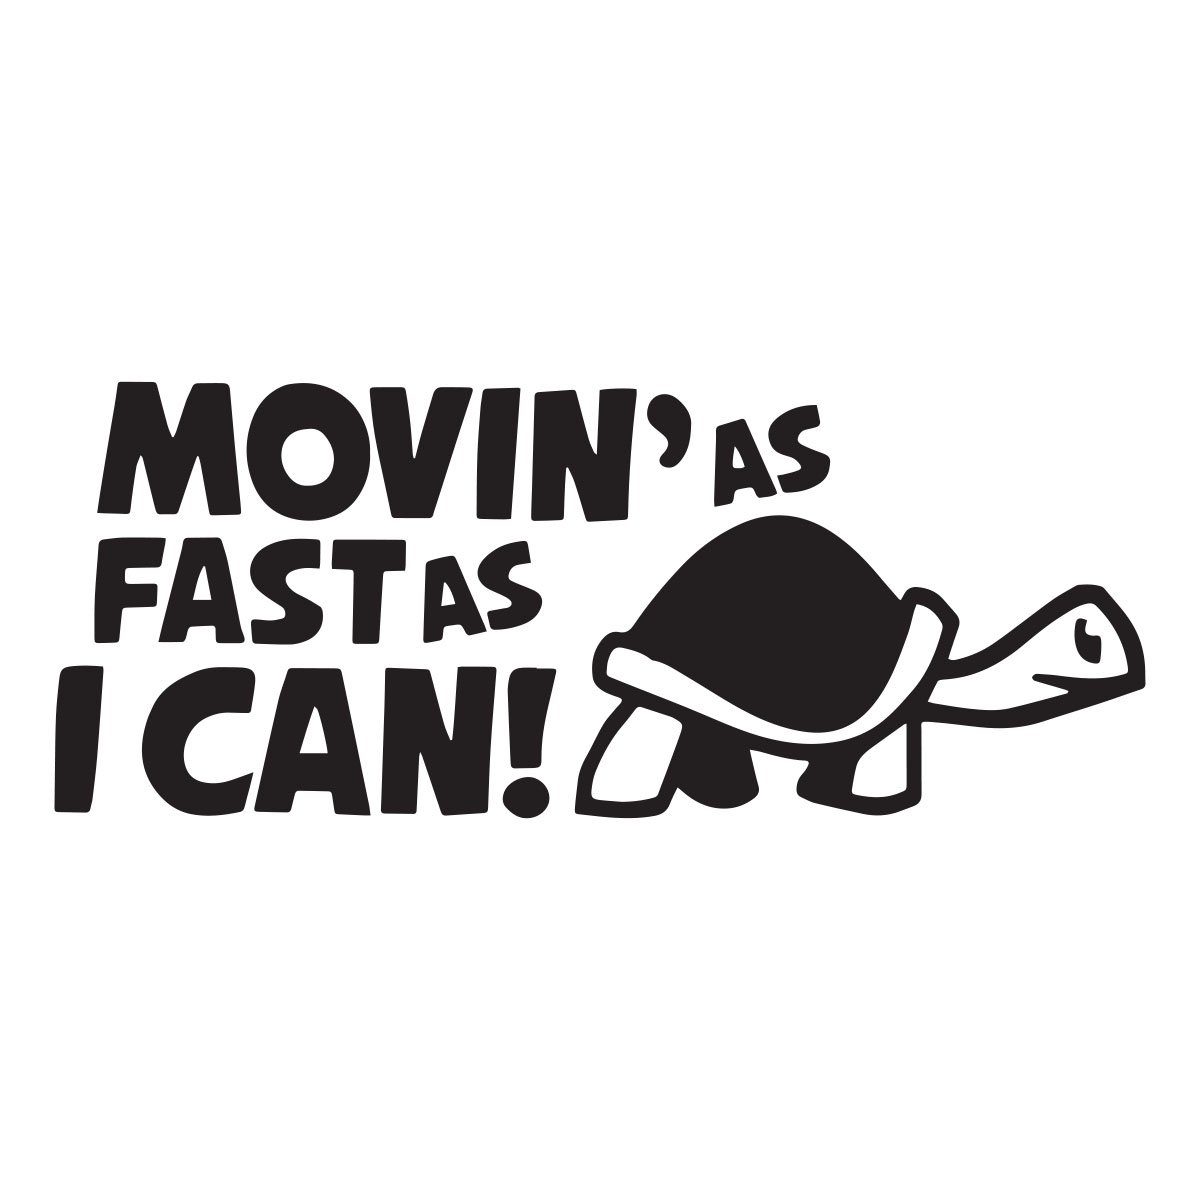 moving as fast as i can